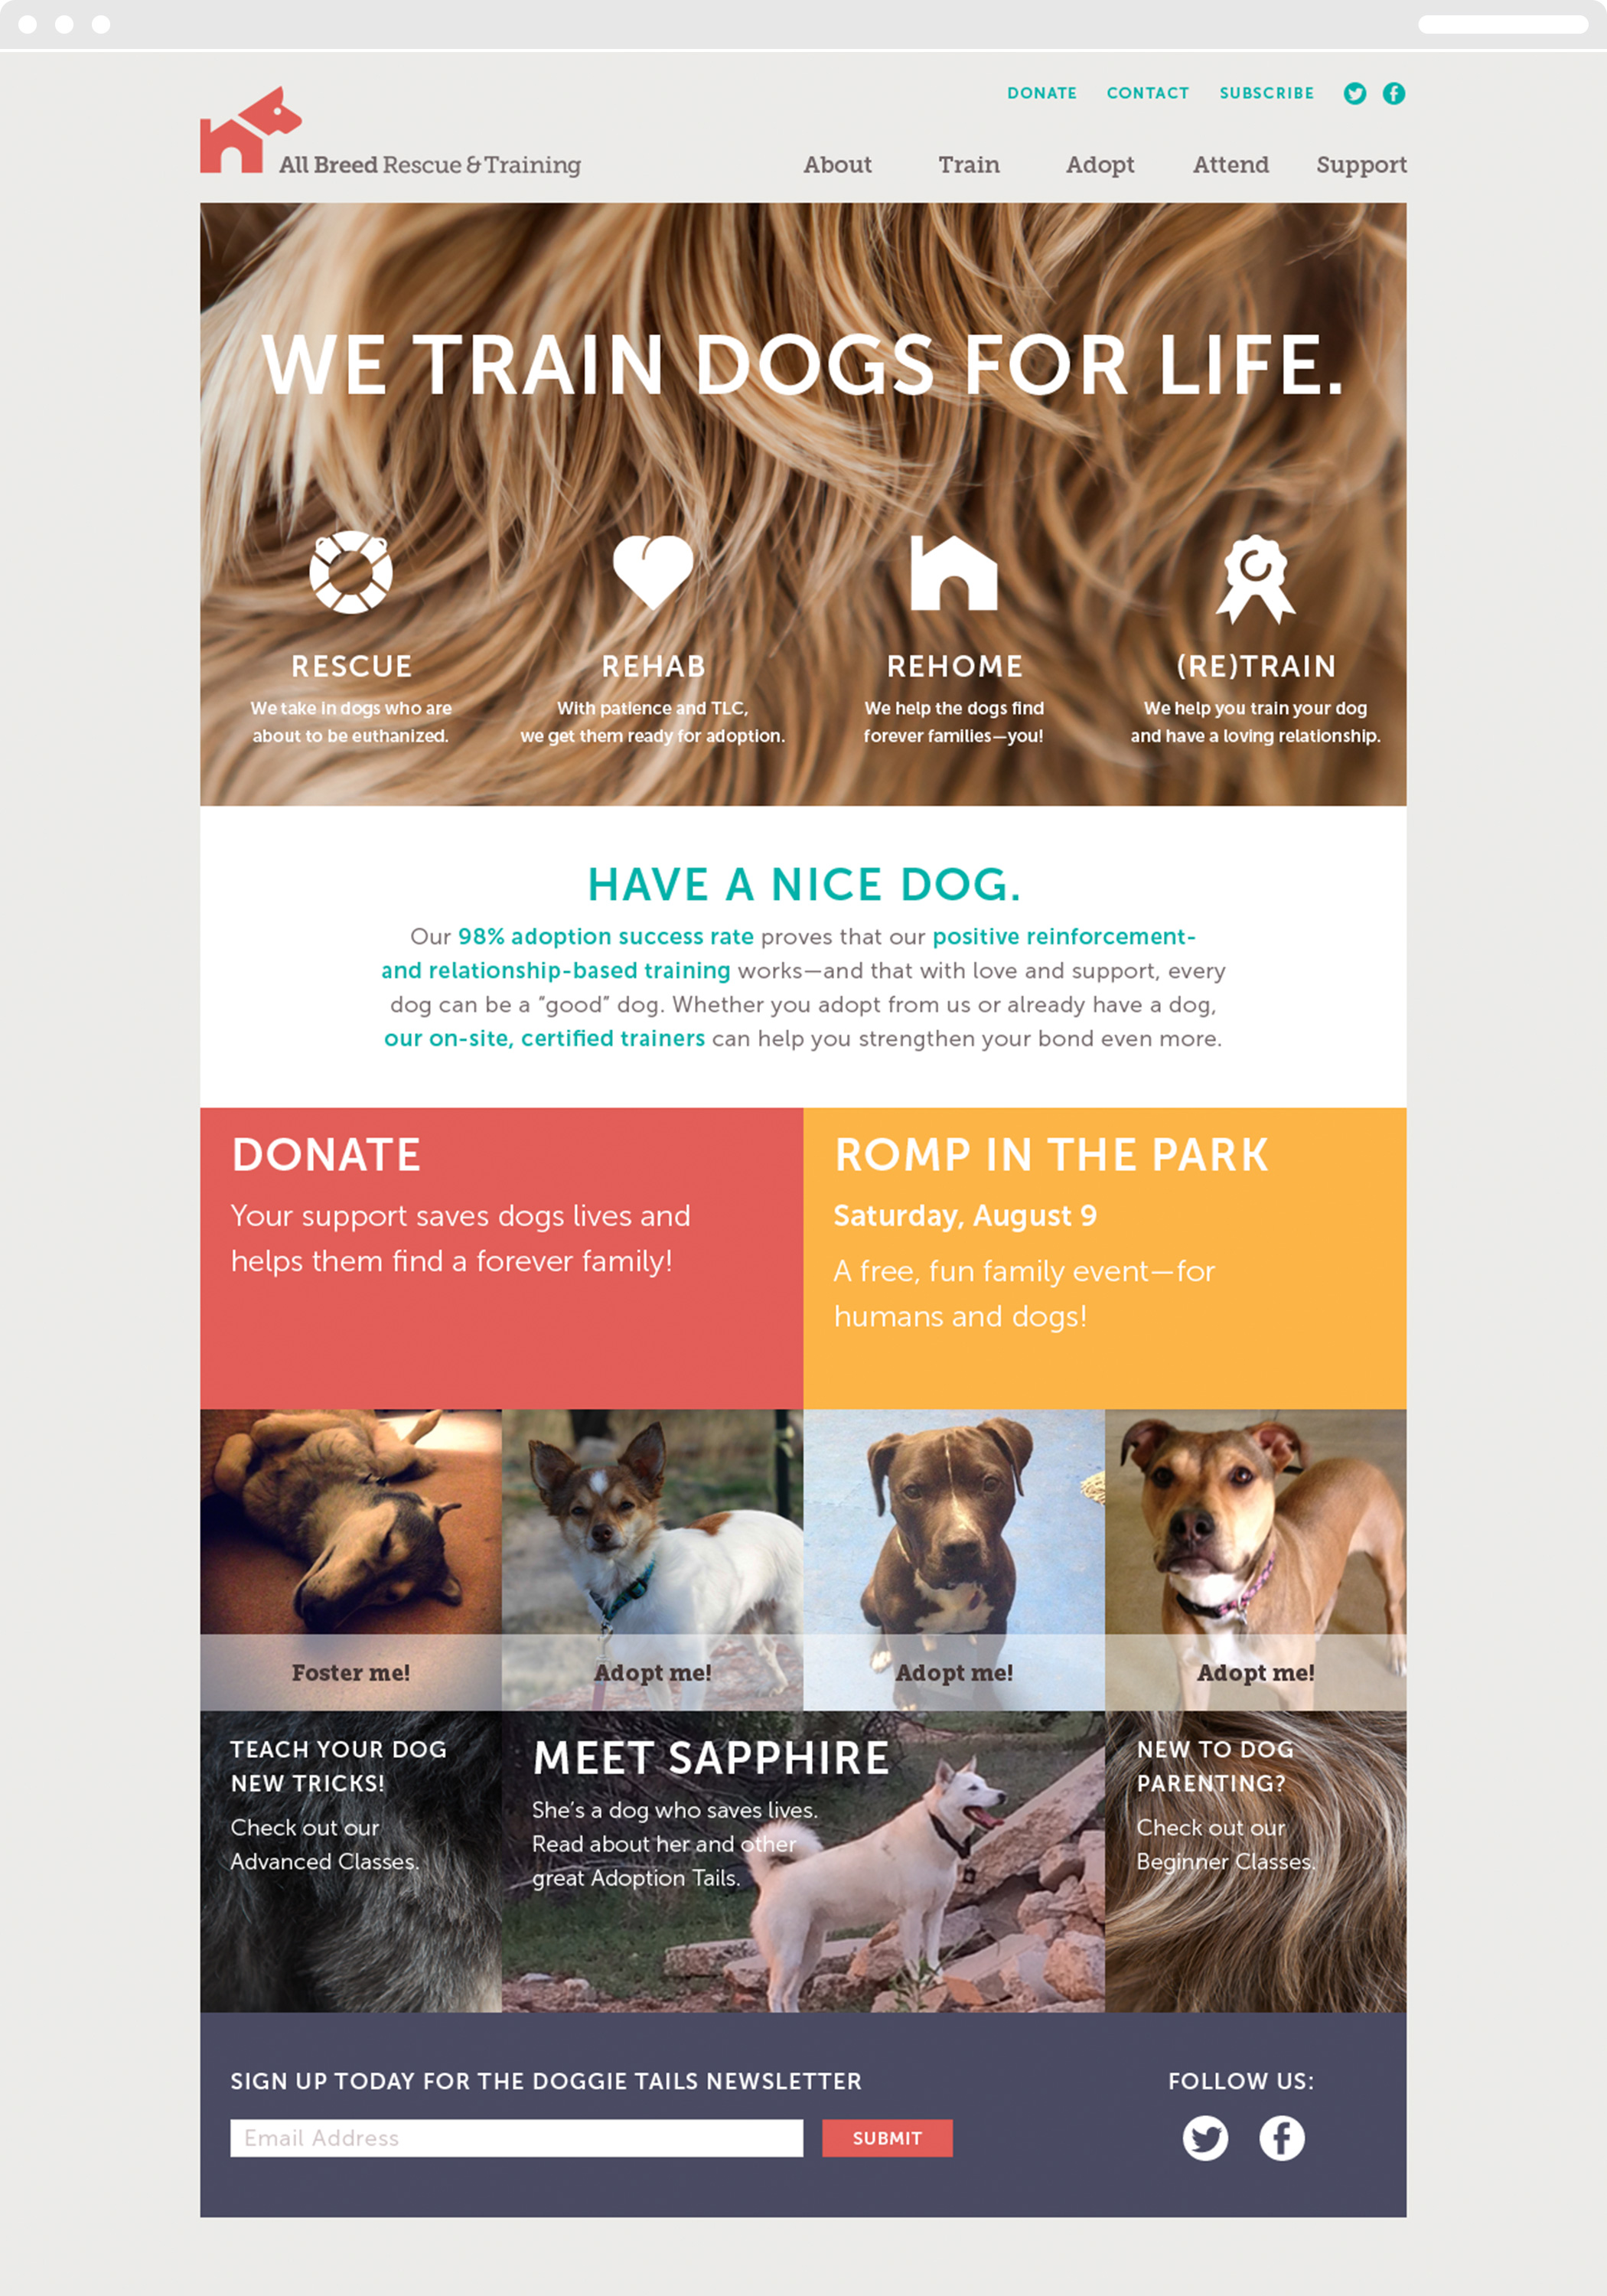 All Breed Rescue and Training web homepage, with the headline, "We train dogs for life," and descriptions of their services.